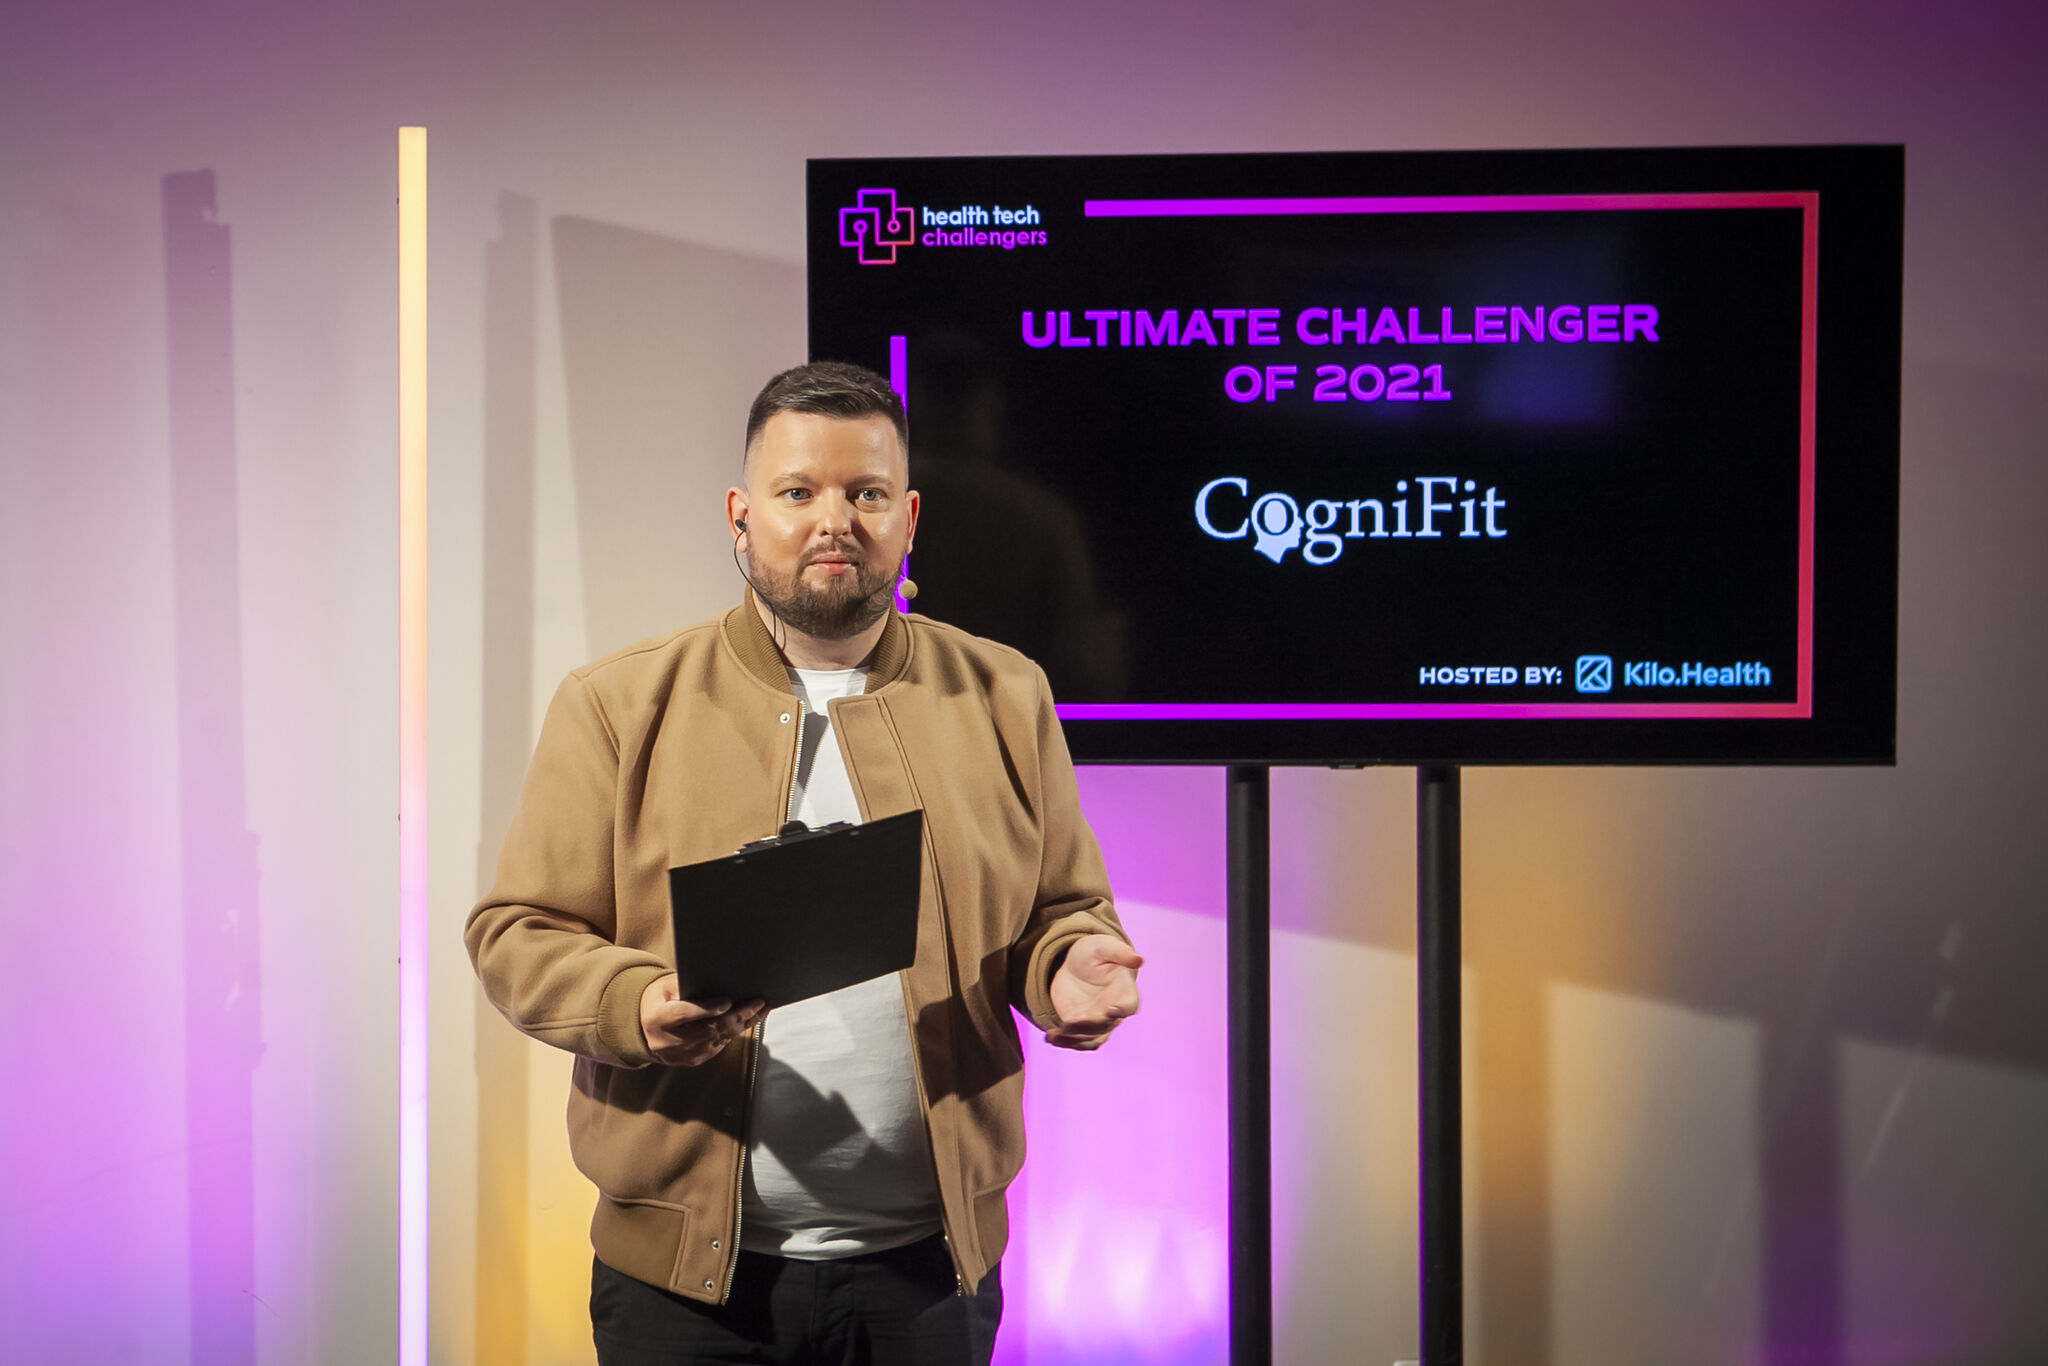 CogniFit announced winner of Health Tech Challengers 2021